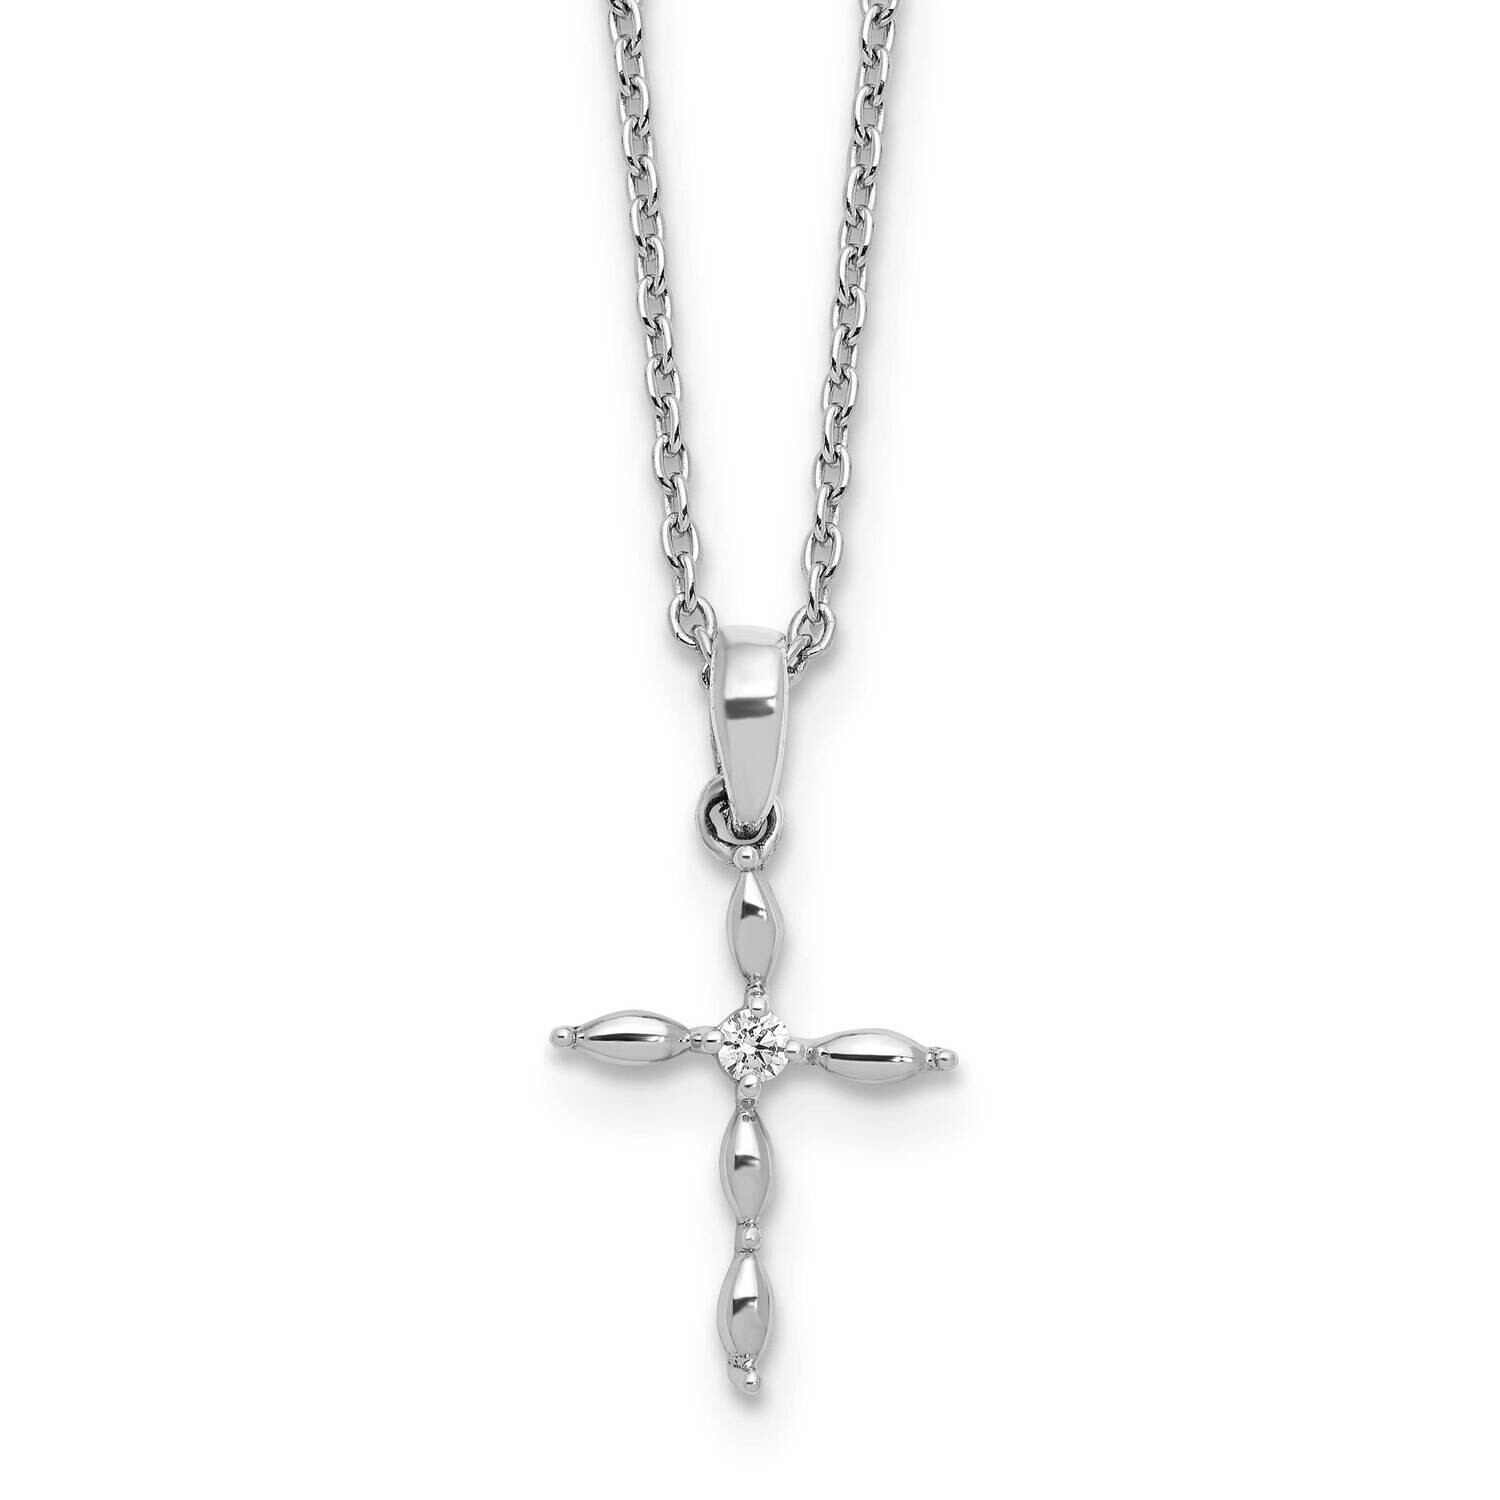 Rh Plated White Ice Diamond Cross 2 Inch Extension Necklace Sterling Silver QW575-18